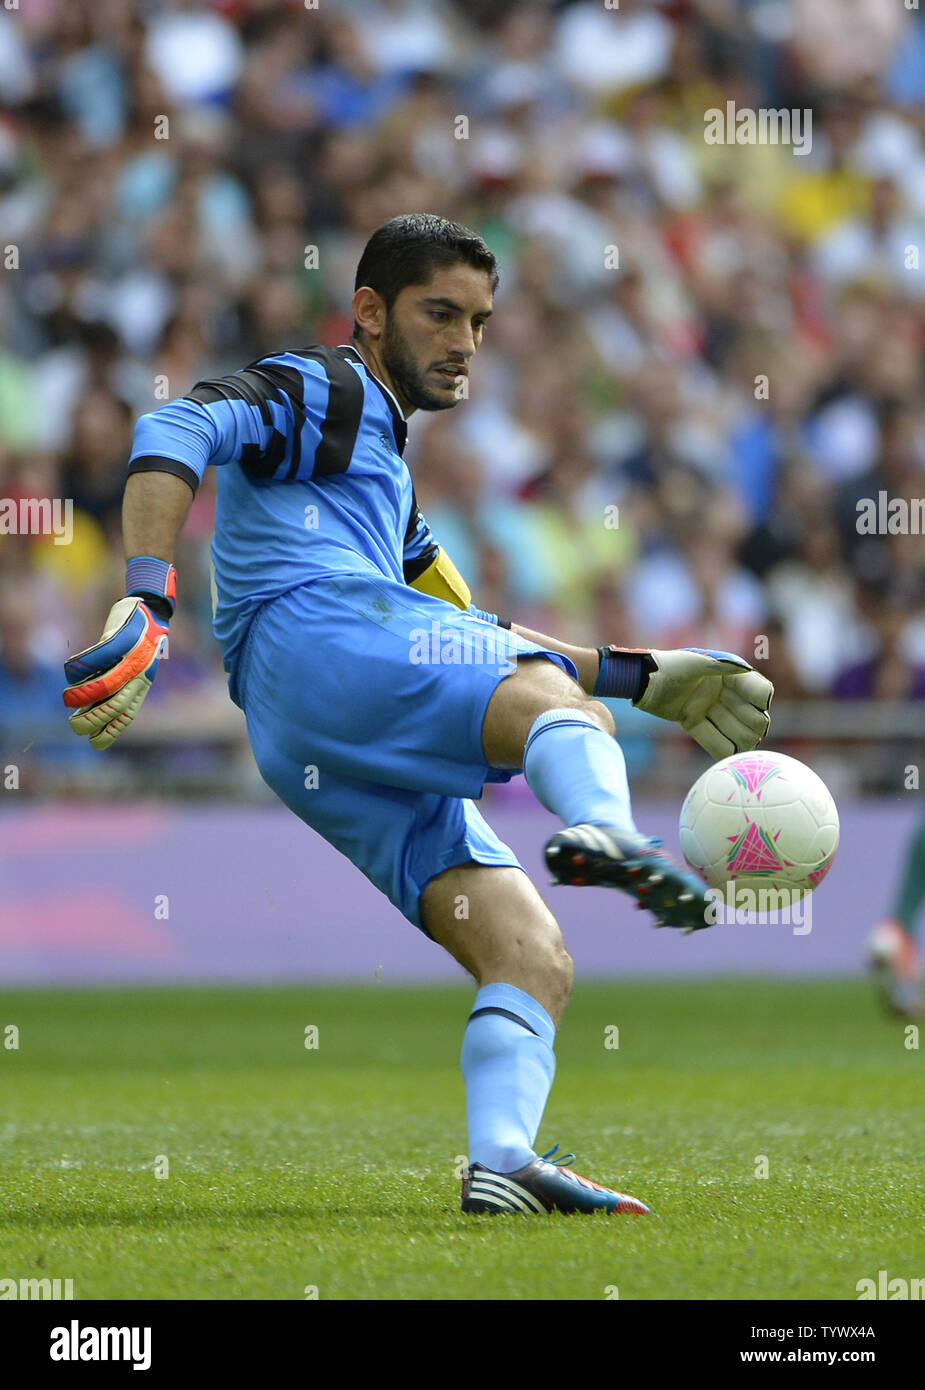 Goalkeeper Jose Corona of Mexico kicks  the ball during the second half of the Gold Medal Football Match against Brazil at the London 2012 Summer Olympics on August 11, 2012 at Wembley Stadium, London. Mexico defeated Brazil 2-1 to win the Gold Medal.      UPI/Brian Kersey Stock Photo